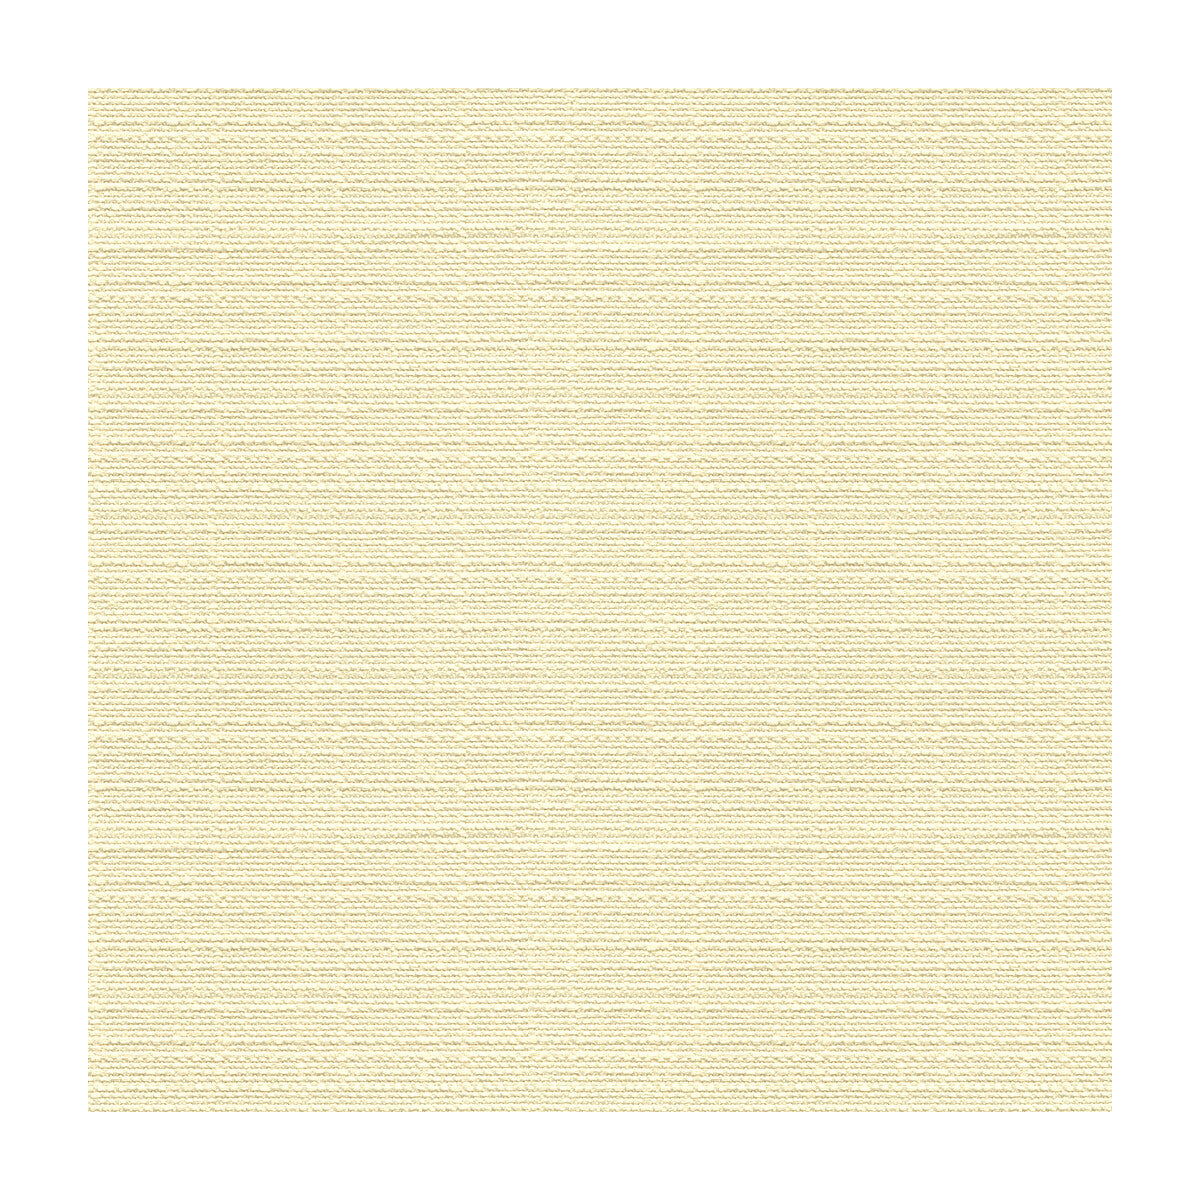 Beekman fabric in coconut color - pattern 34188.101.0 - by Kravet Contract in the Crypton Incase collection